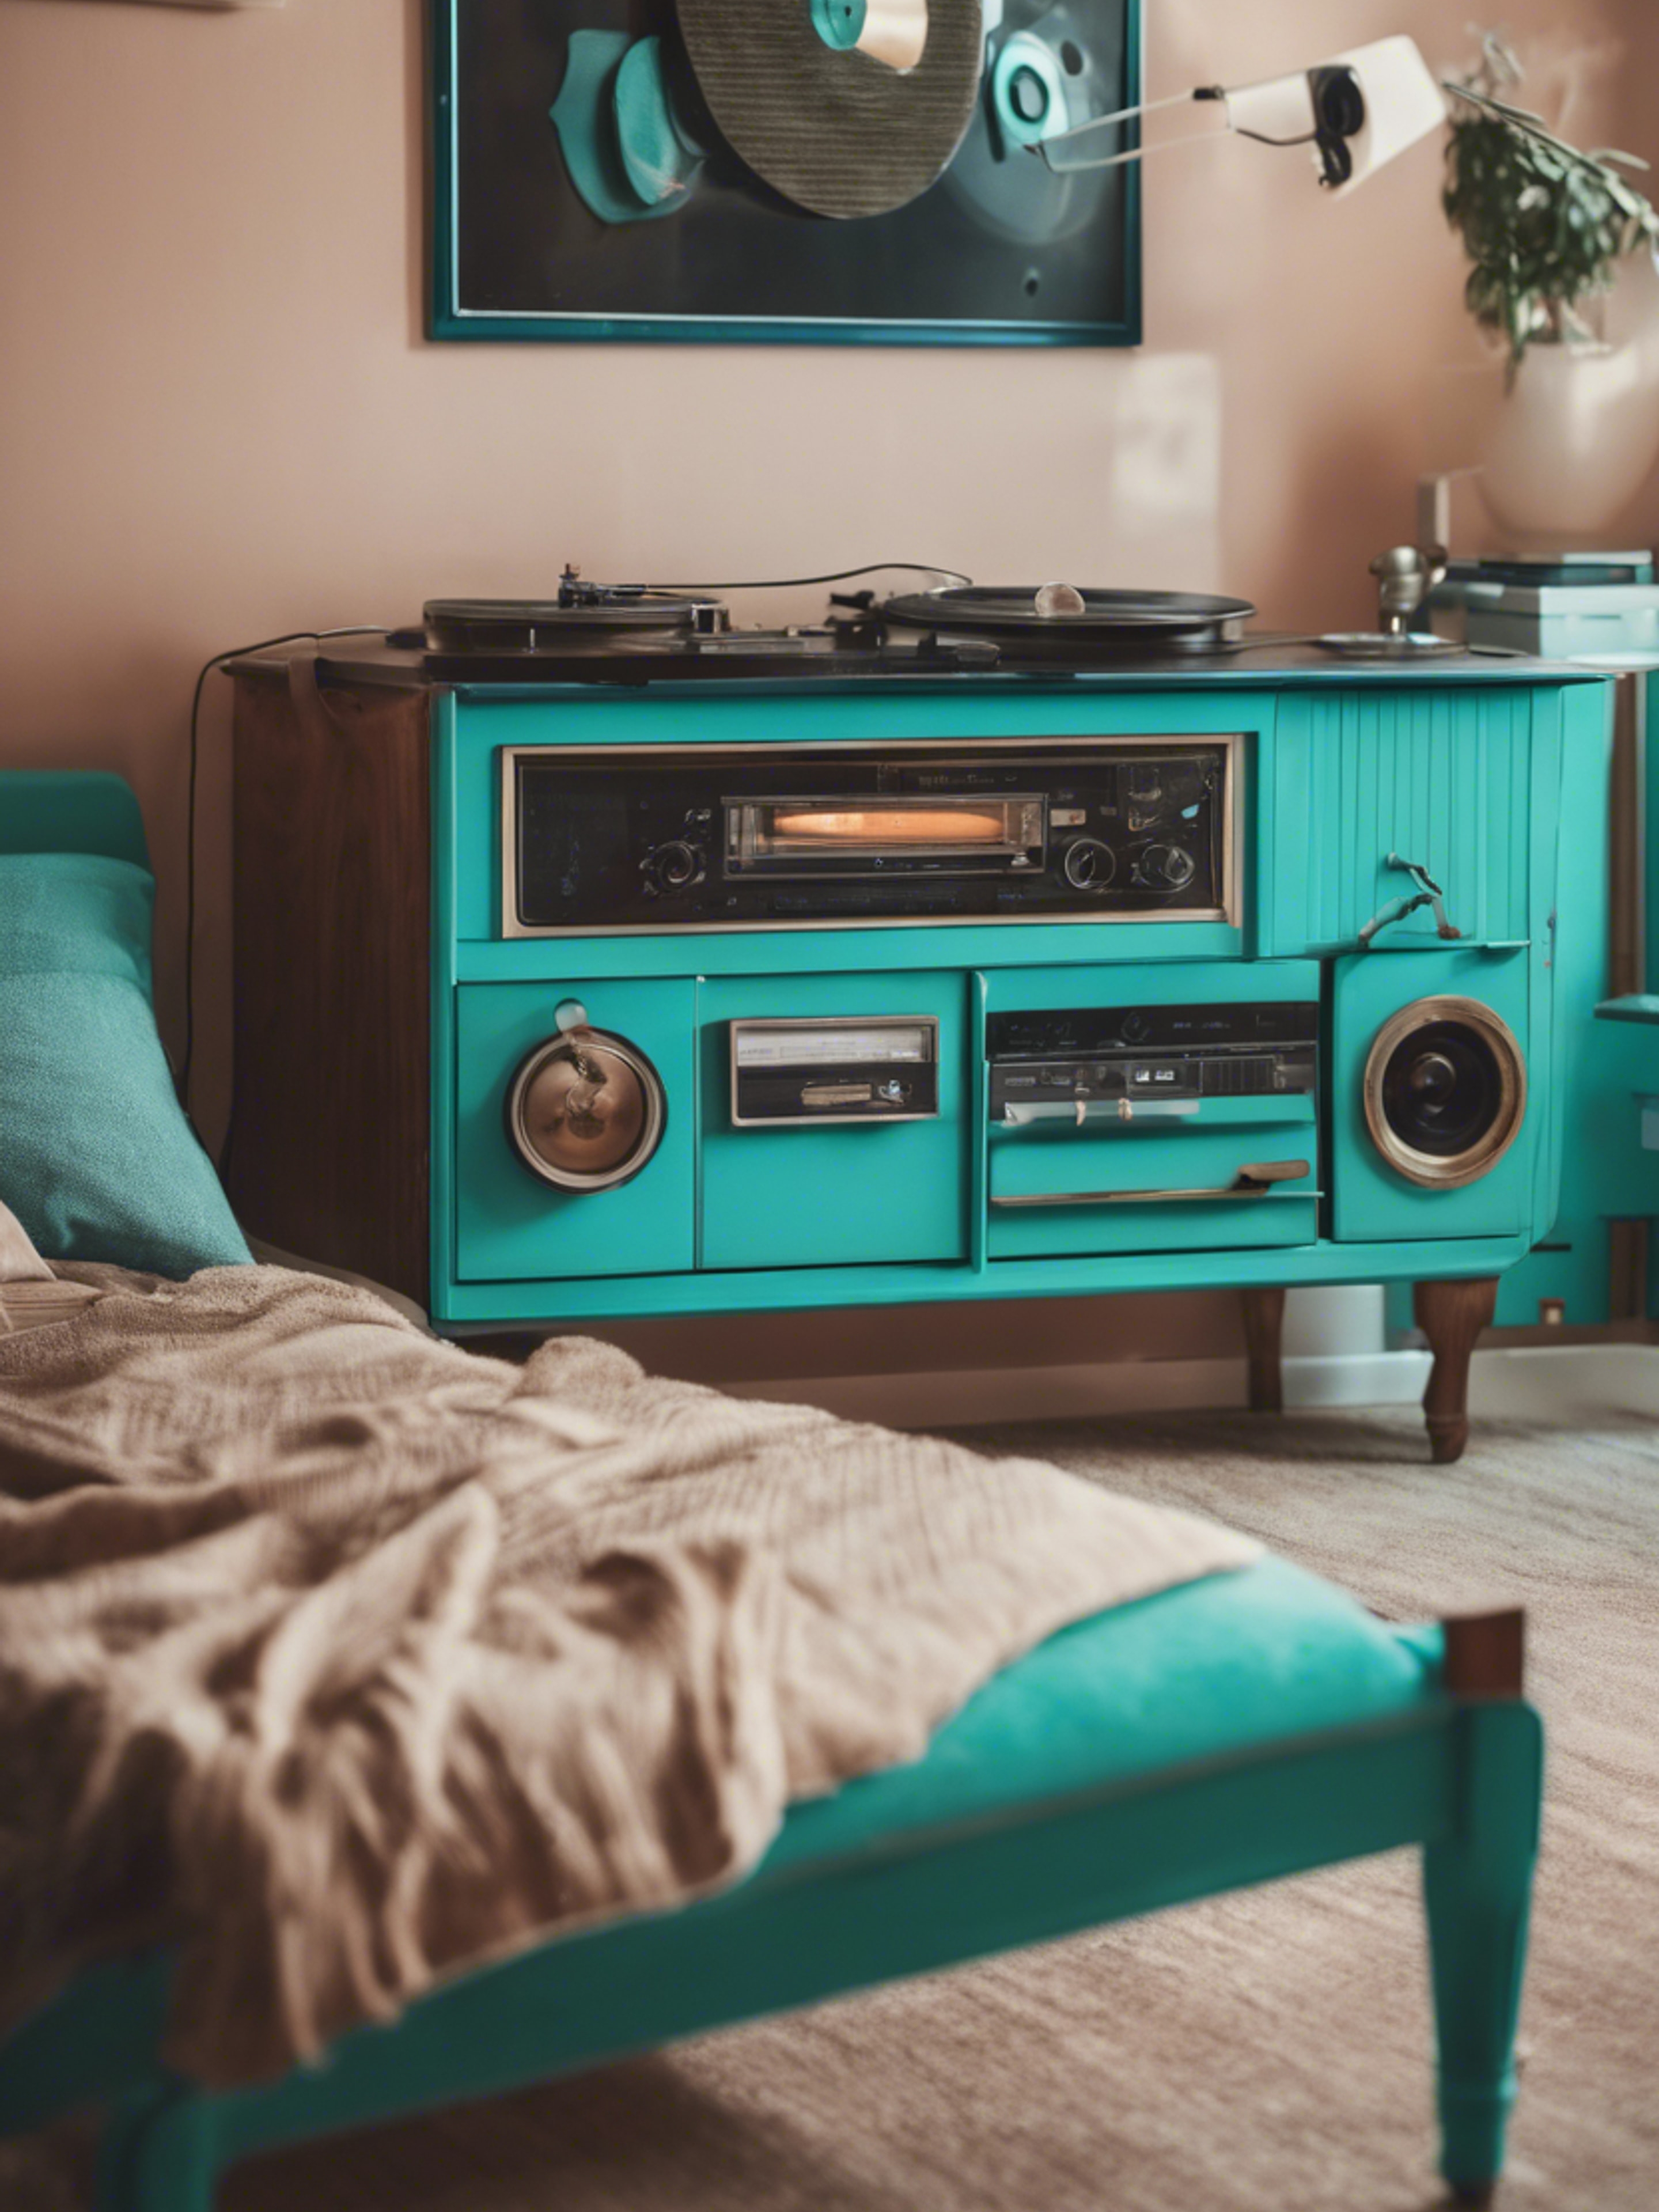 A turquoise retro bedroom with vintage furniture and record players วอลล์เปเปอร์[9d05420ae9754c17b49a]